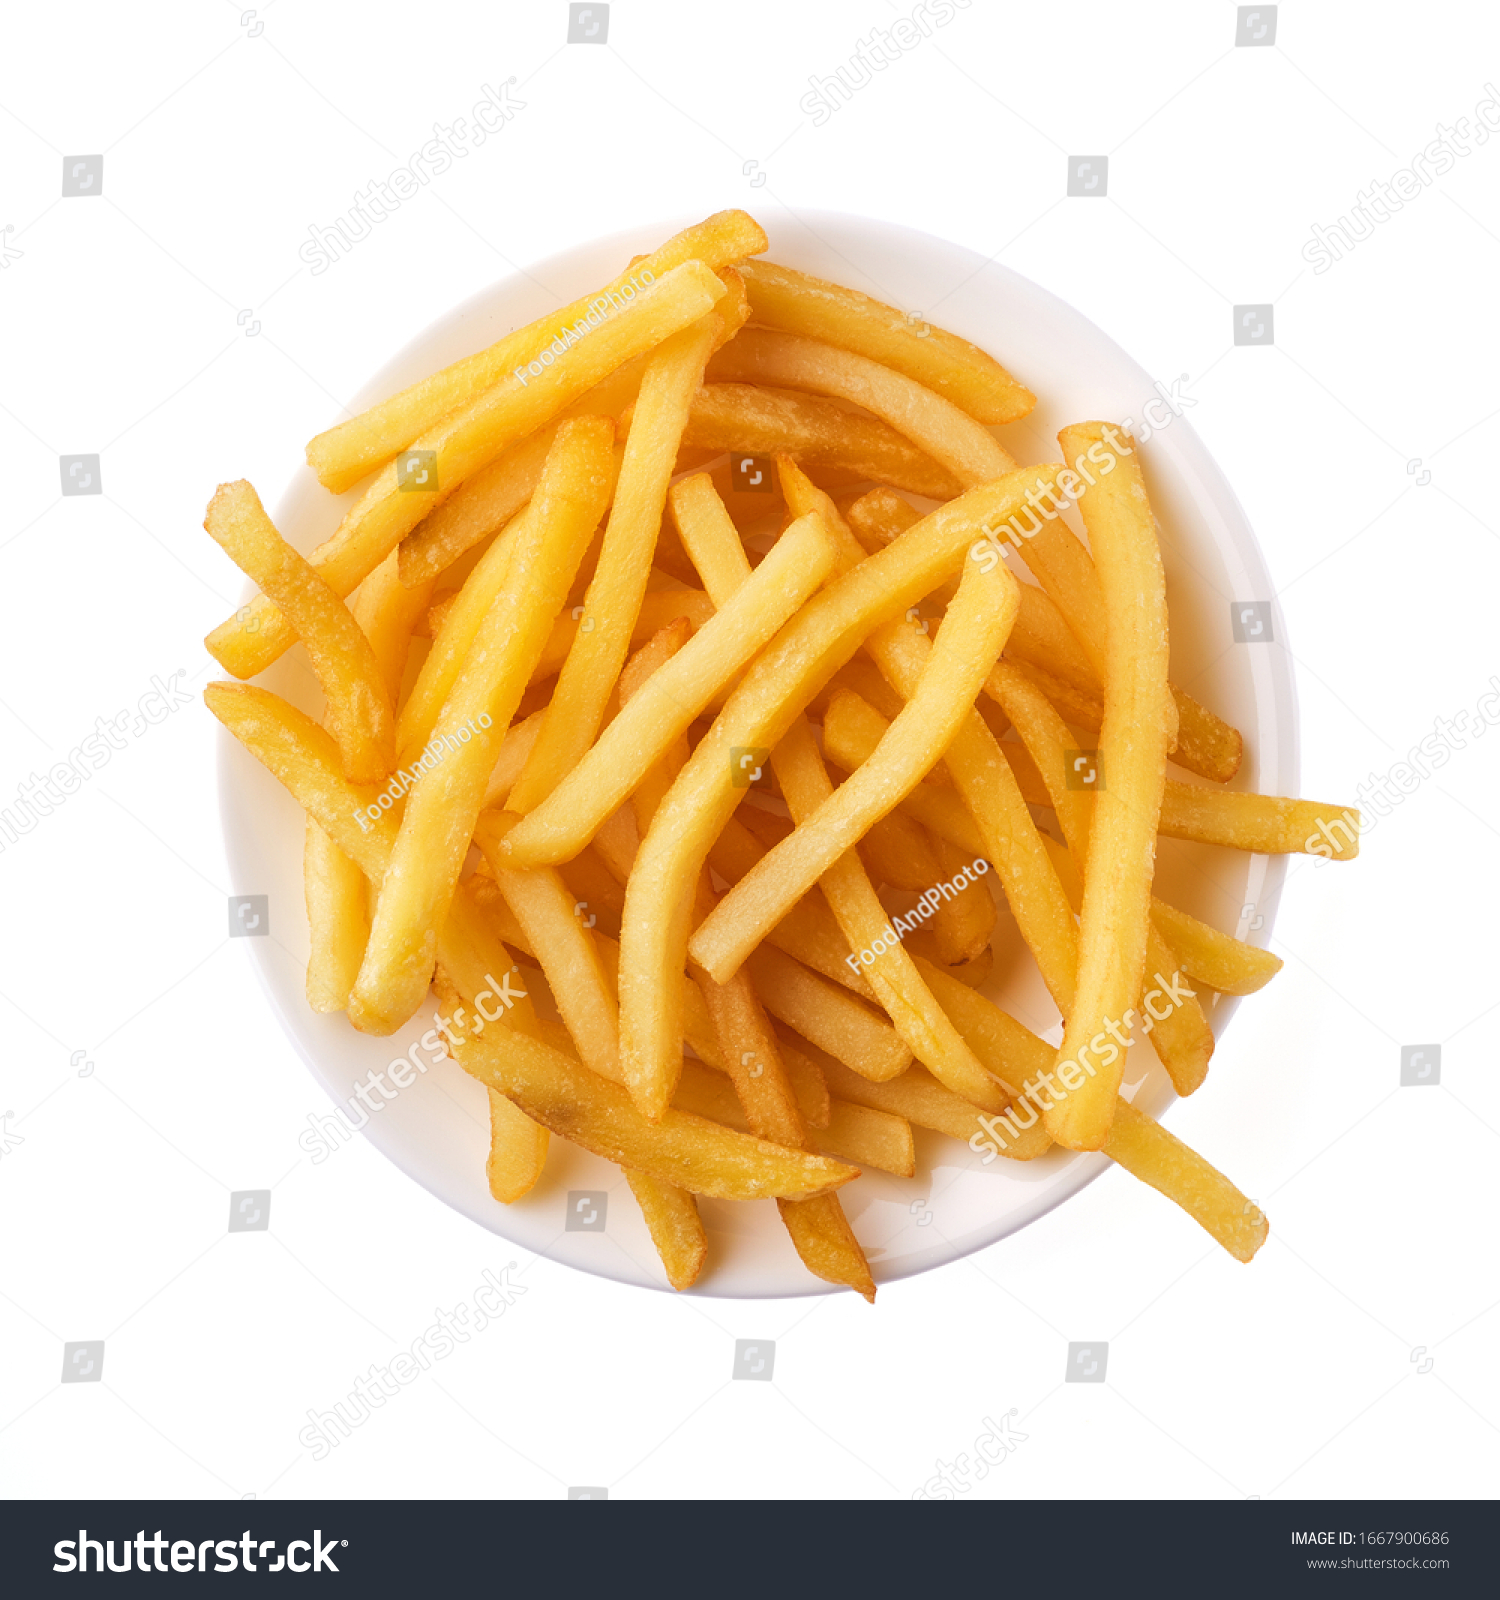 French fries in a plate isolated on white background, top view. #1667900686